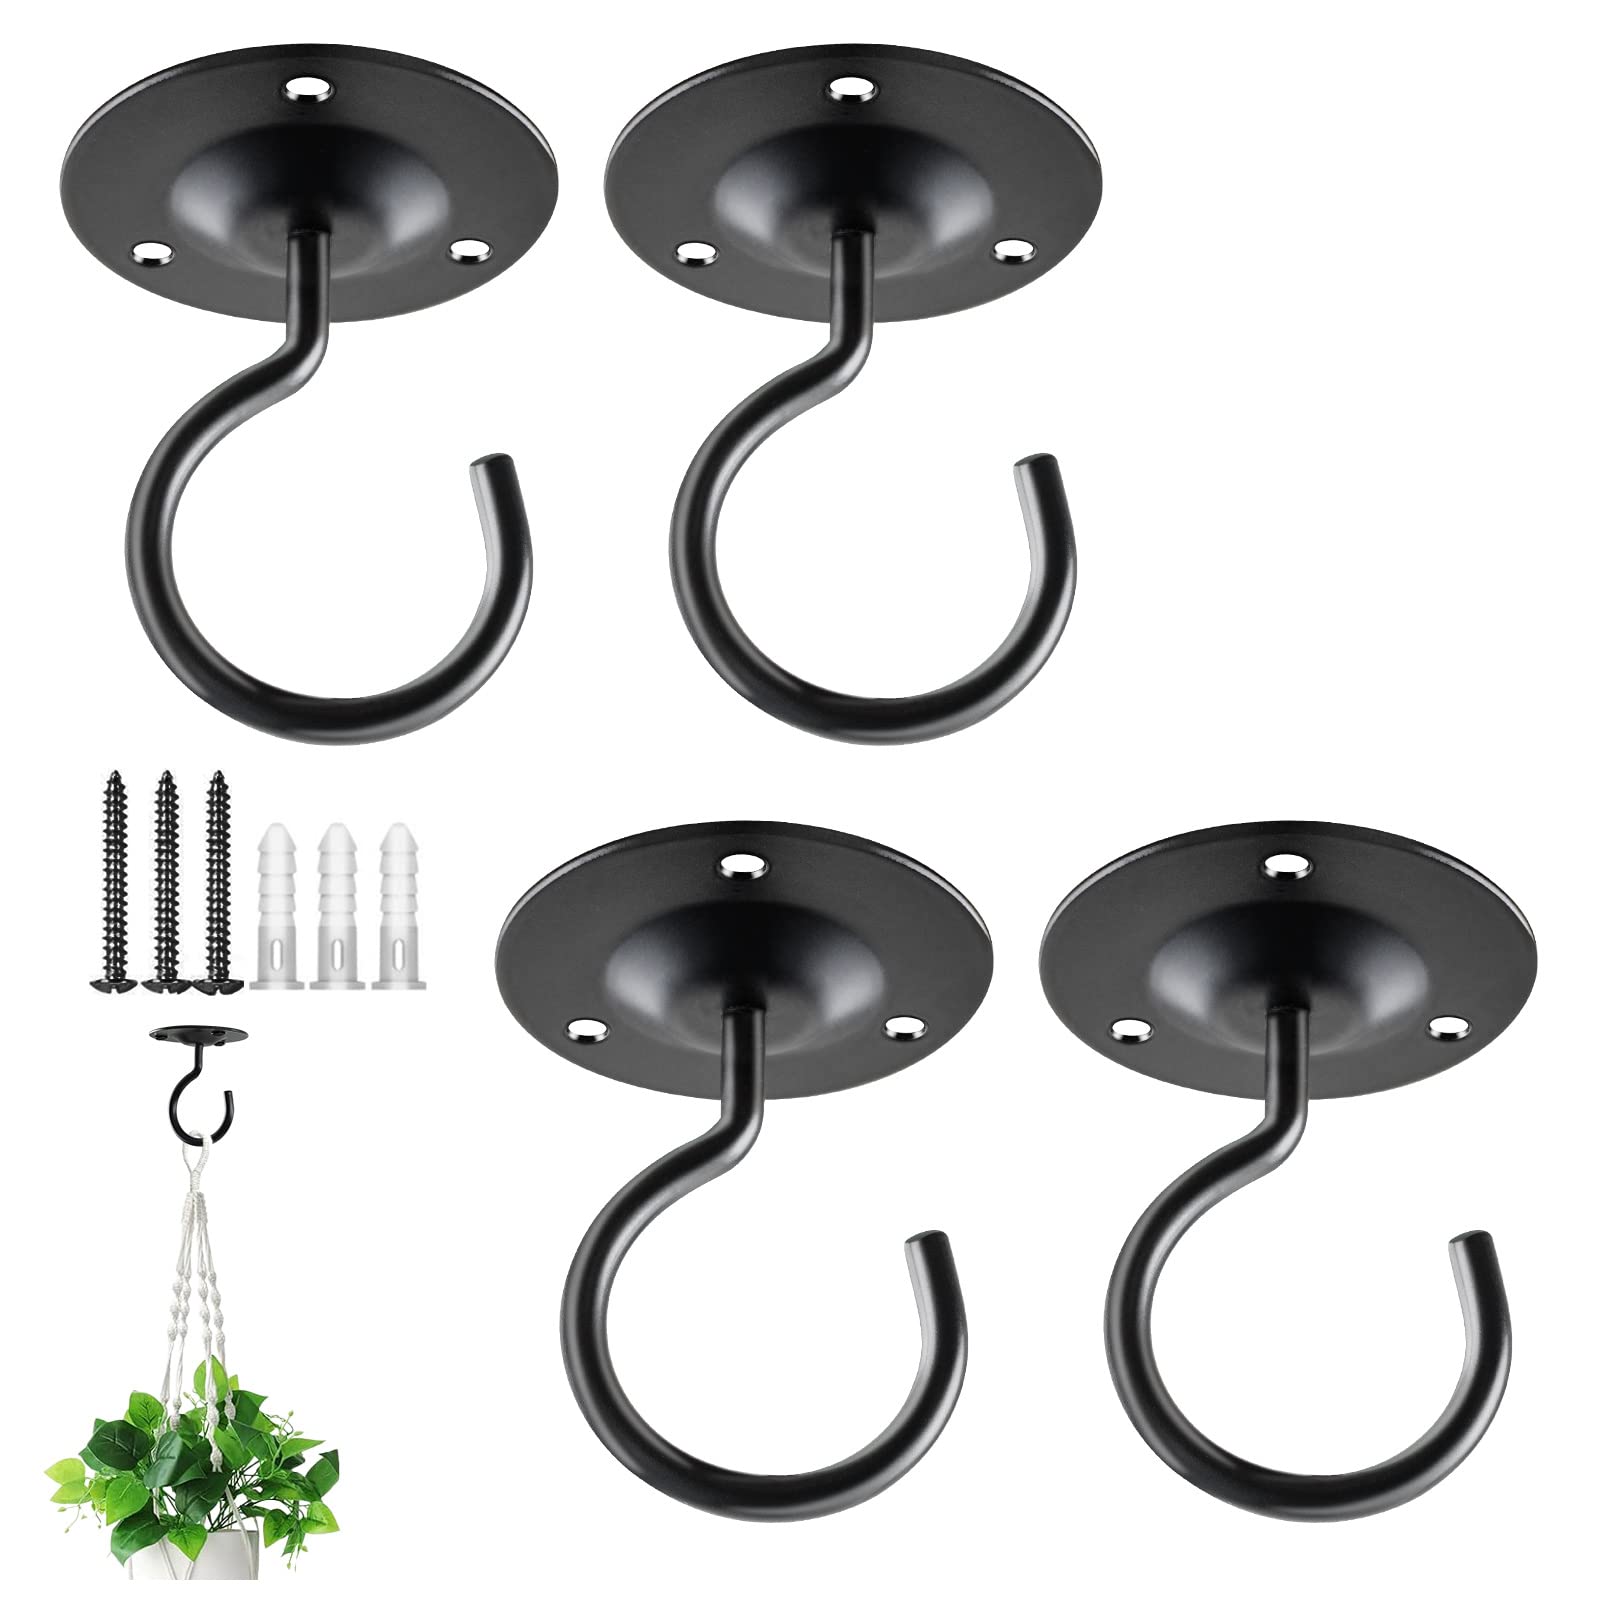 Bolite Ceiling Hooks For Hanging Plants, Wall Mount Metal Hangers For Bird Feeders, Plants, Lanterns, String Lights, Wind Chimes